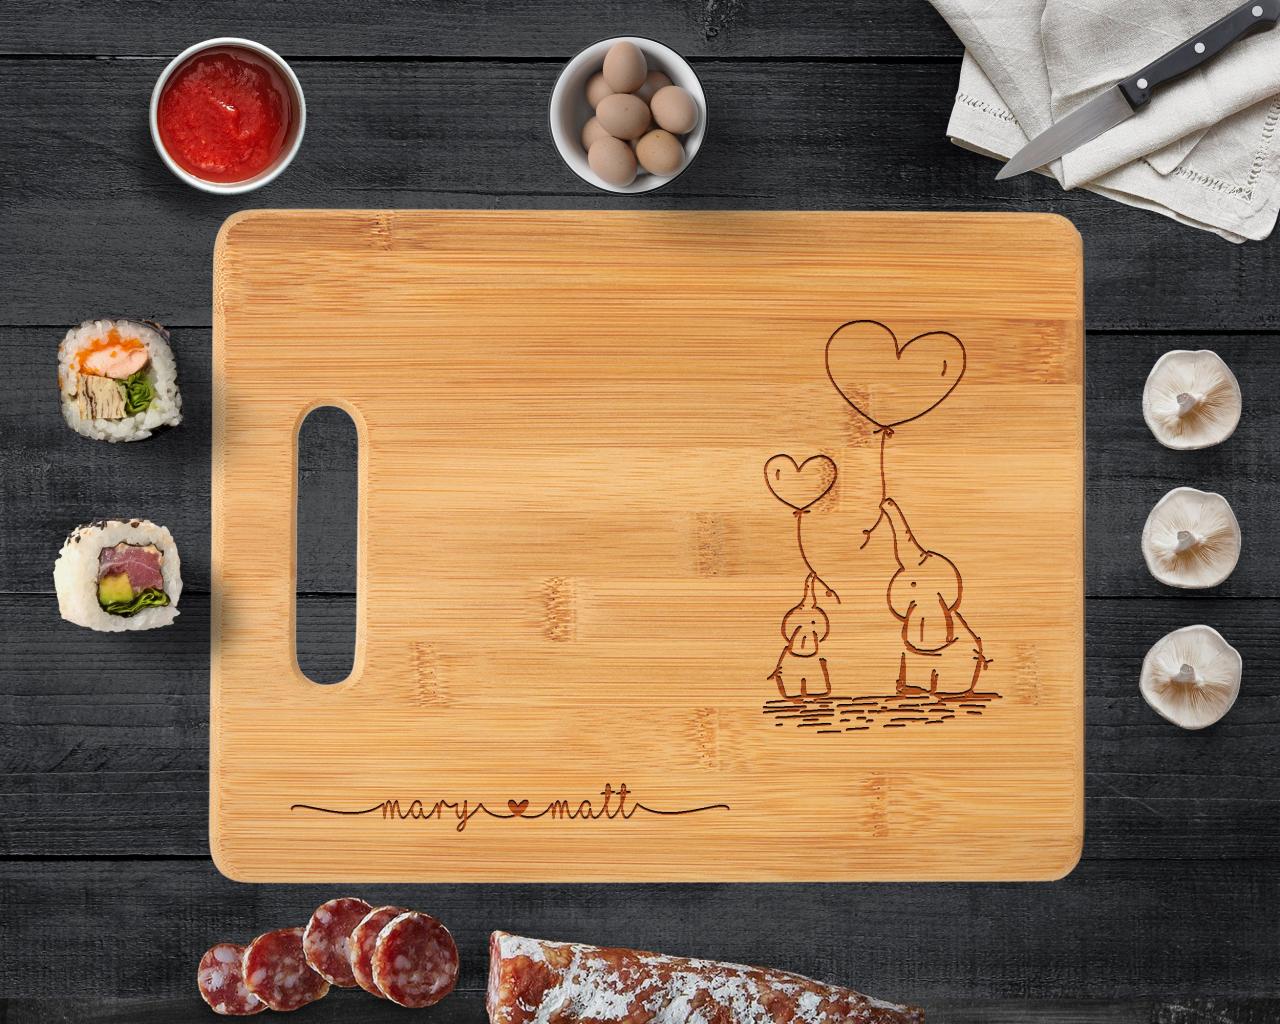 Personalized Mother's Day Cutting Board, Thank You Mom Cutting